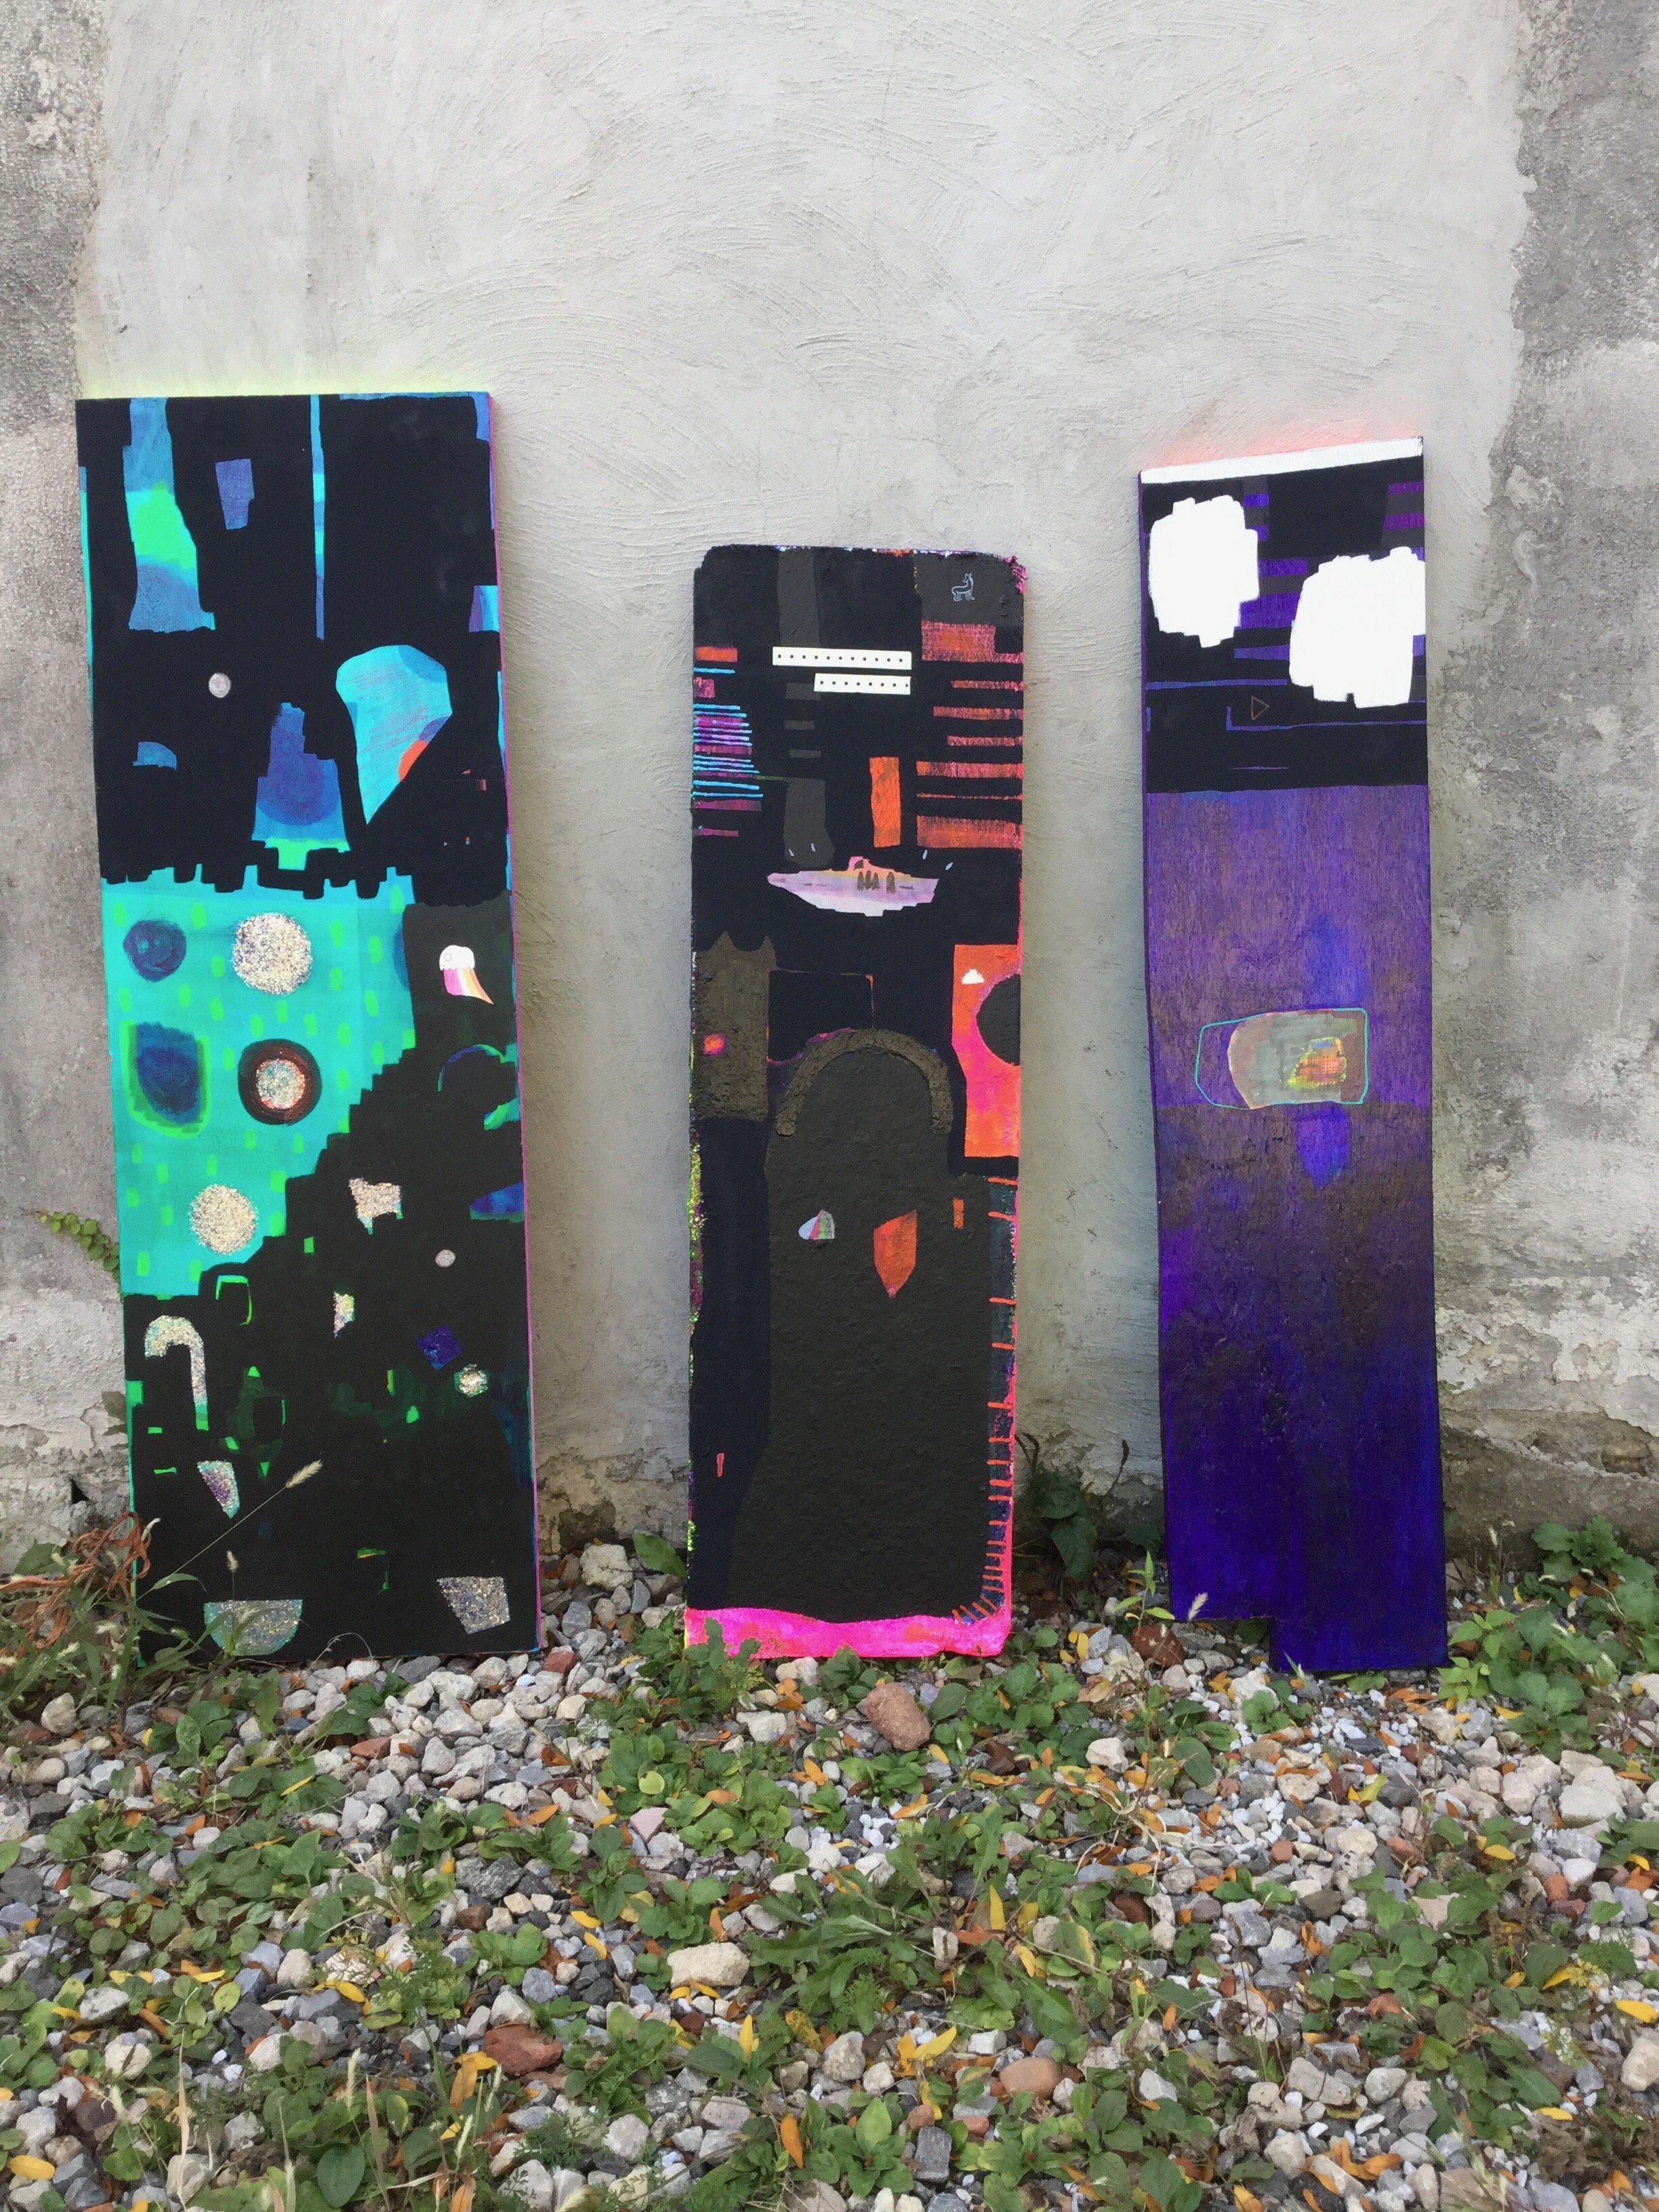  From  Grave/Monolith Series,  Site-specific installation at Art Lot Brooklyn.    Acrylic, Flashe, glitter, collage, ink and colored pencil on found wood, dimensions variable.             